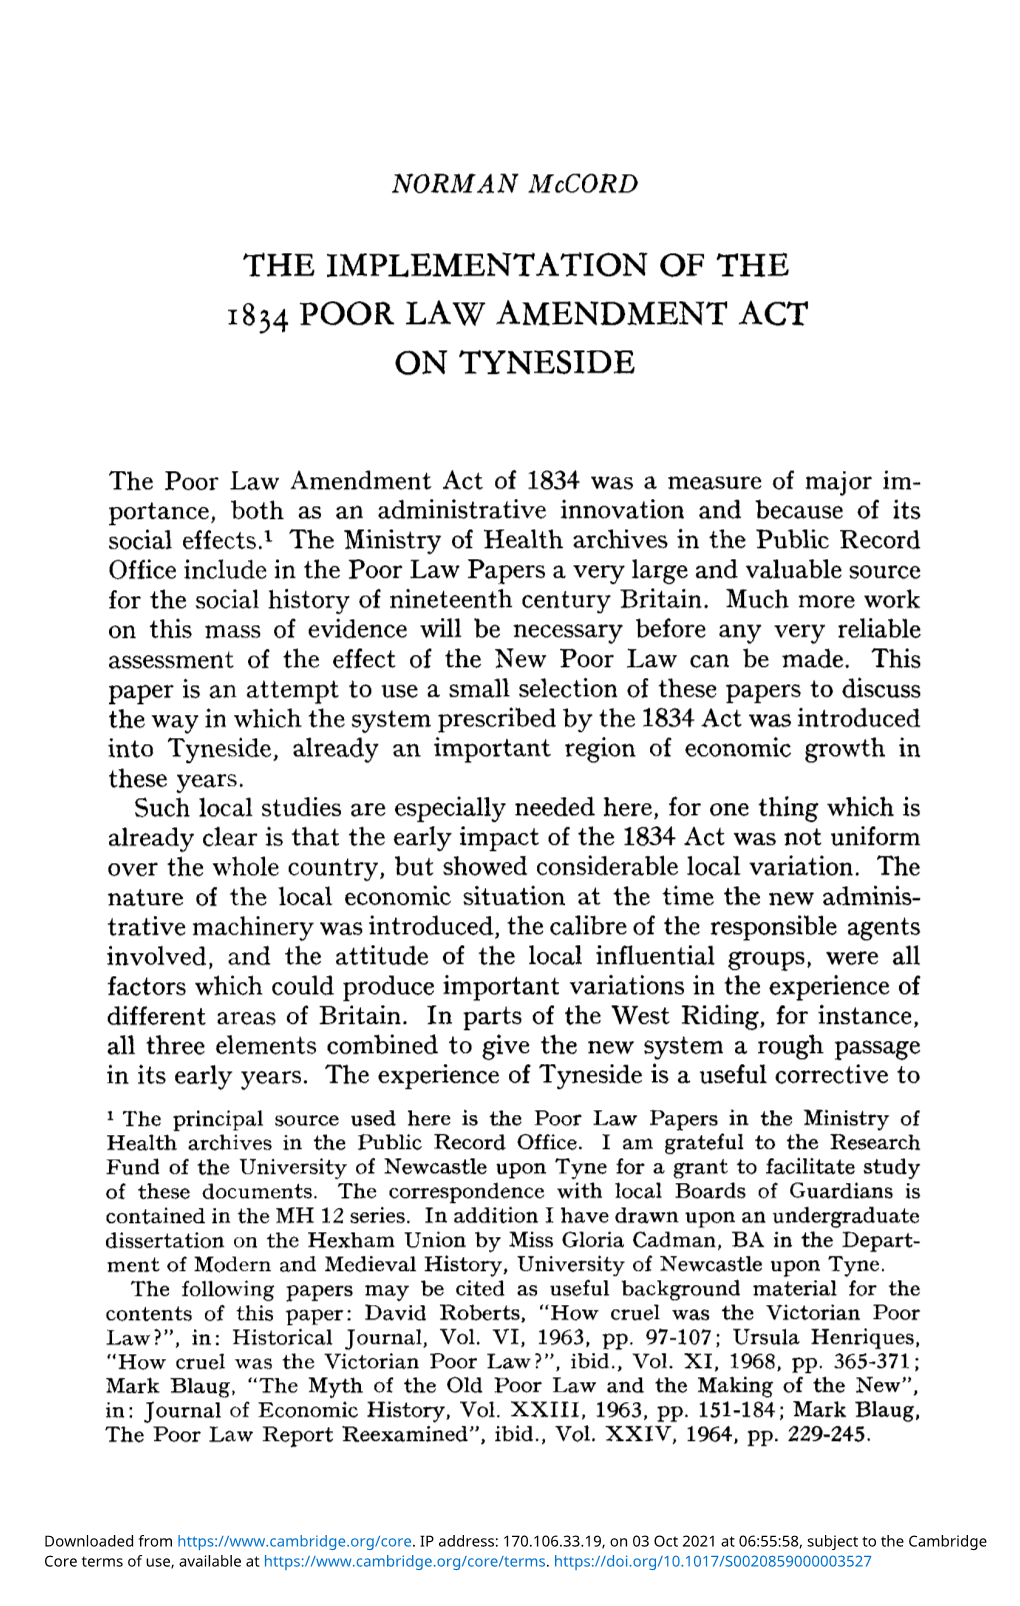 The Implementation of the 1834 Poor Law Amendment Act on Tyneside